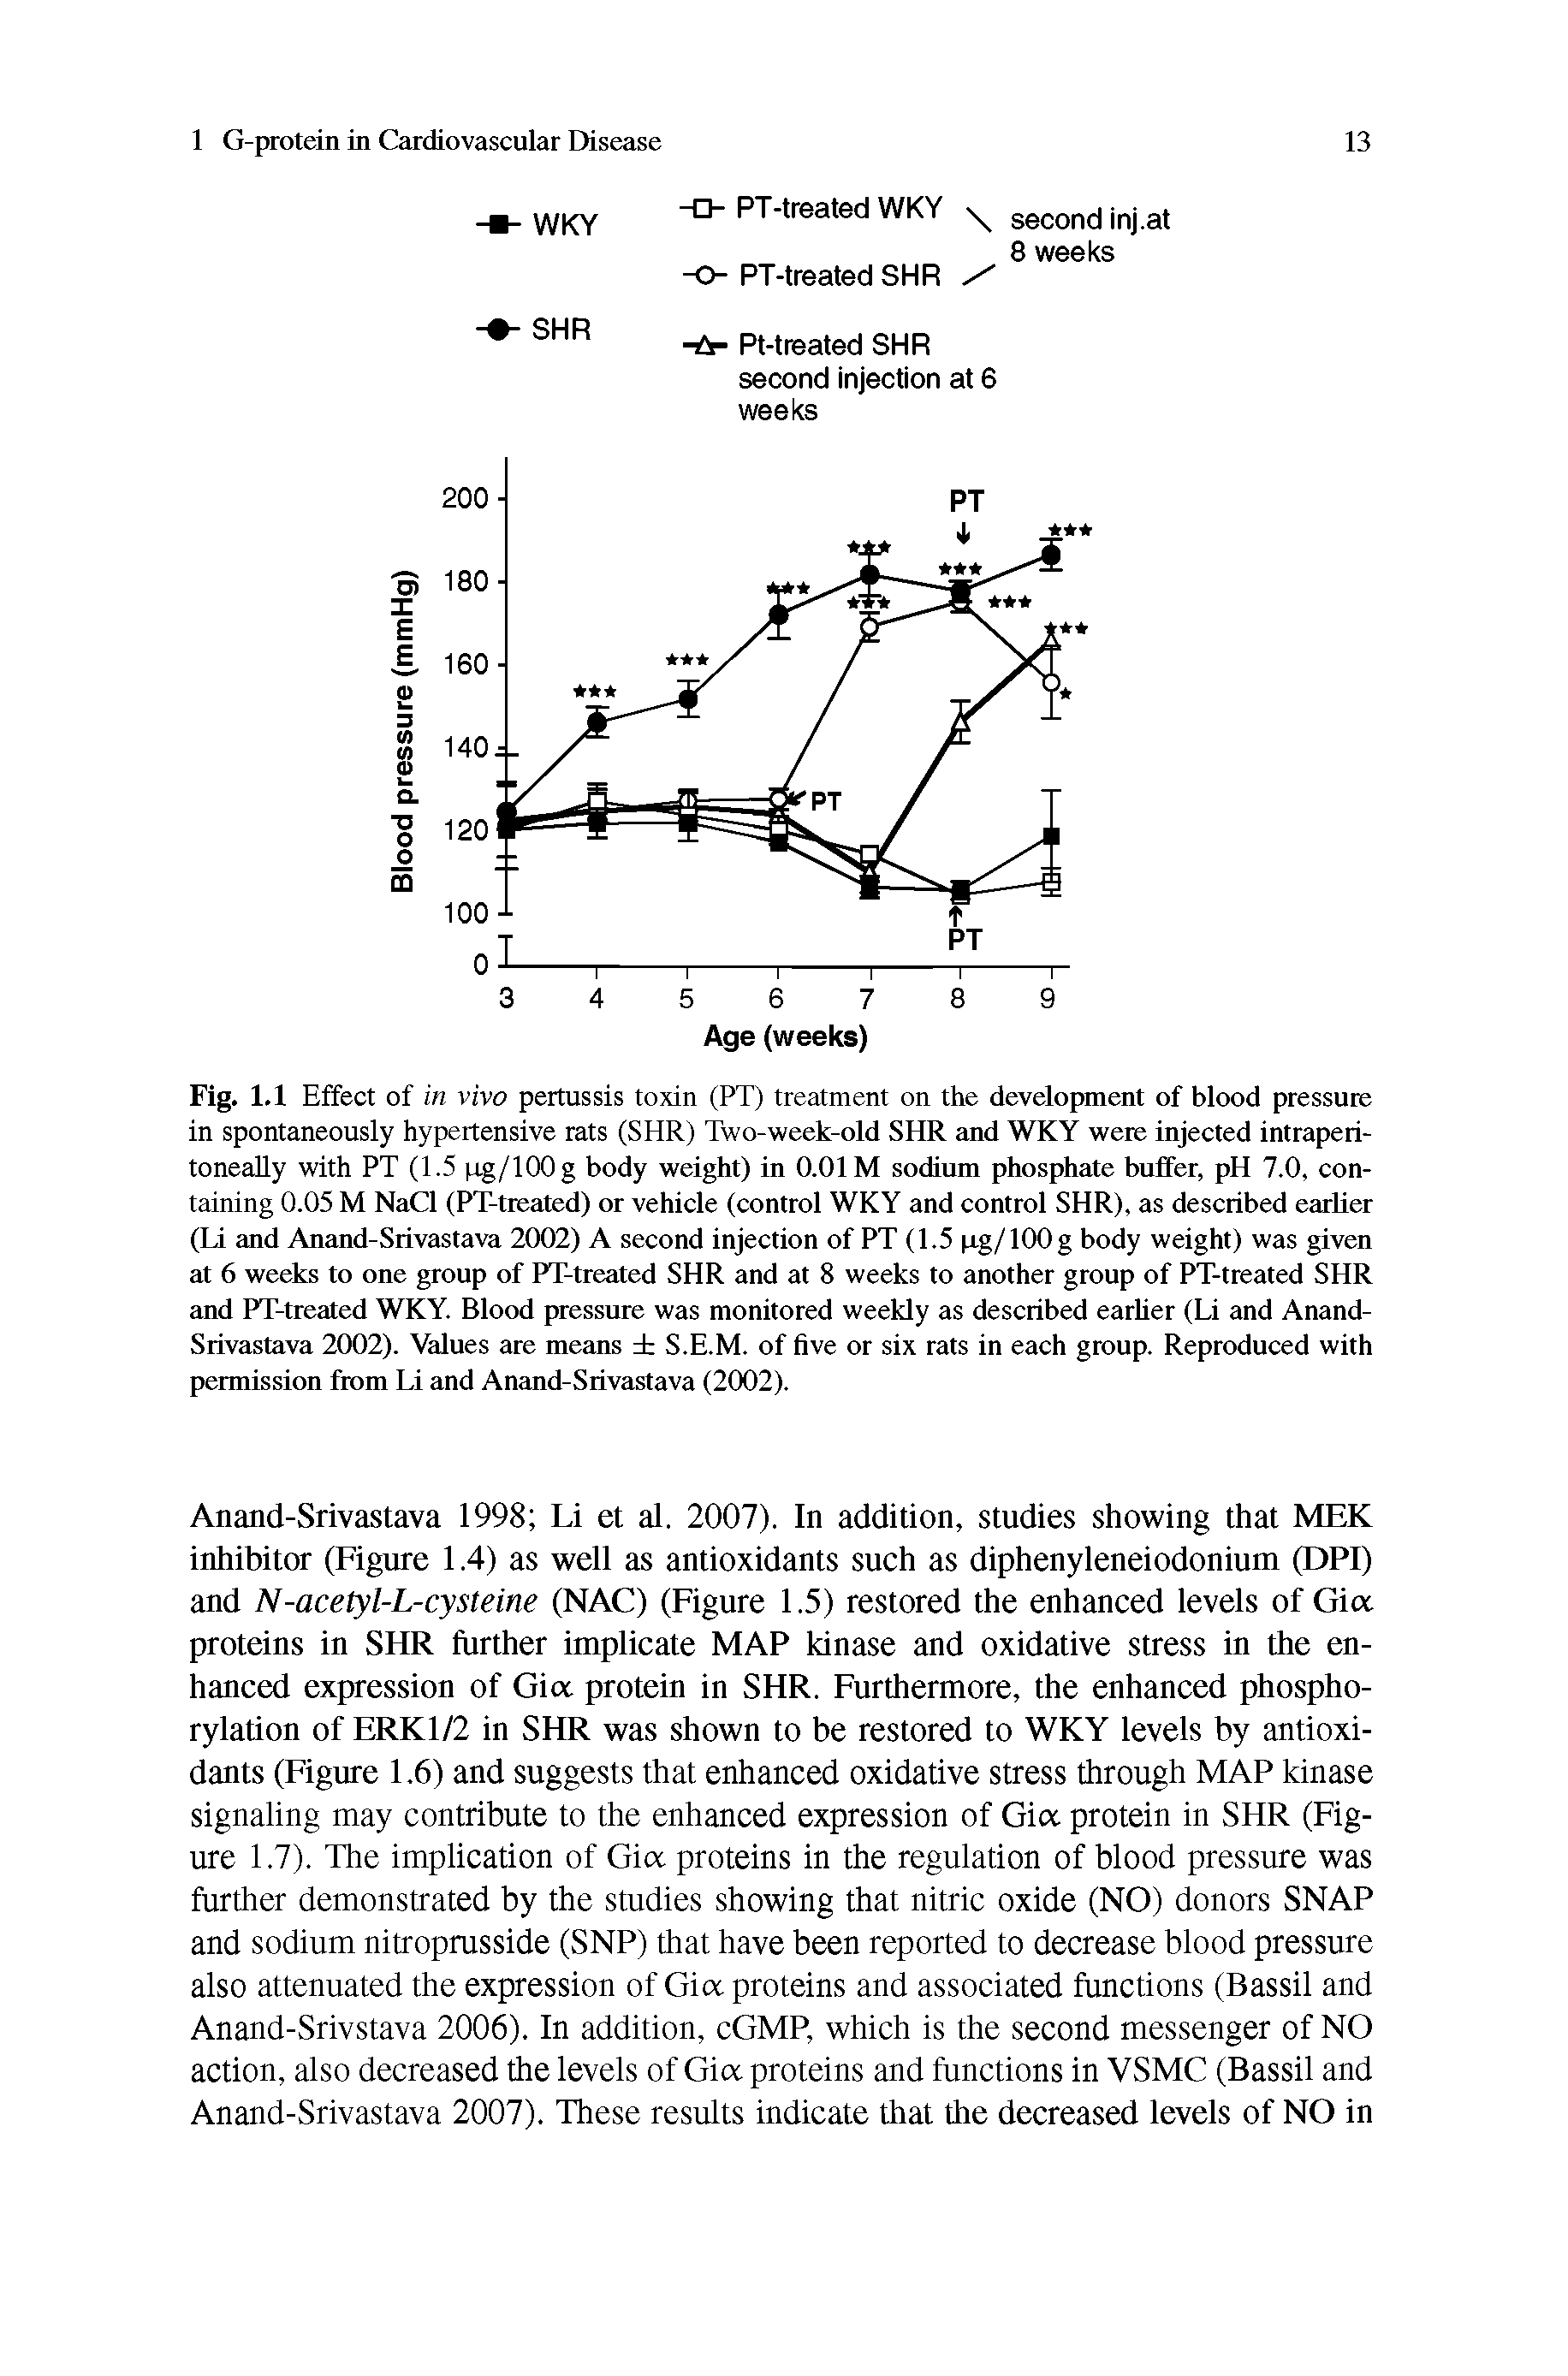 Fig. 1.1 Effect of in vivo pertussis toxin (PT) treatment on the development of blood pressure in spontaneously hypertensive rats (SHR) Two-week-old SHR and WKY were injected intraperi-toneally with PT (1.5 pg/lOOg body weight) in 0.01M sodium phosphate buffer, pH 7.0, containing 0.05 M NaCl (PT-treated) or vehicle (control WKY and control SHR), as described earlier (Li and Anand-Srivastava 2002) A second injection of PT (1.5 pg/100g body weight) was given at 6 weeks to one group of PT-treated SHR and at 8 weeks to another group of PT-treated SHR and PT-treated WKY. Blood pressure was monitored weekly as described earlier (Li and Anand-Srivastava 2002). Values are means S.E.M. of five or six rats in each group. Reproduced with permission from Li and Anand-Srivastava (2002).